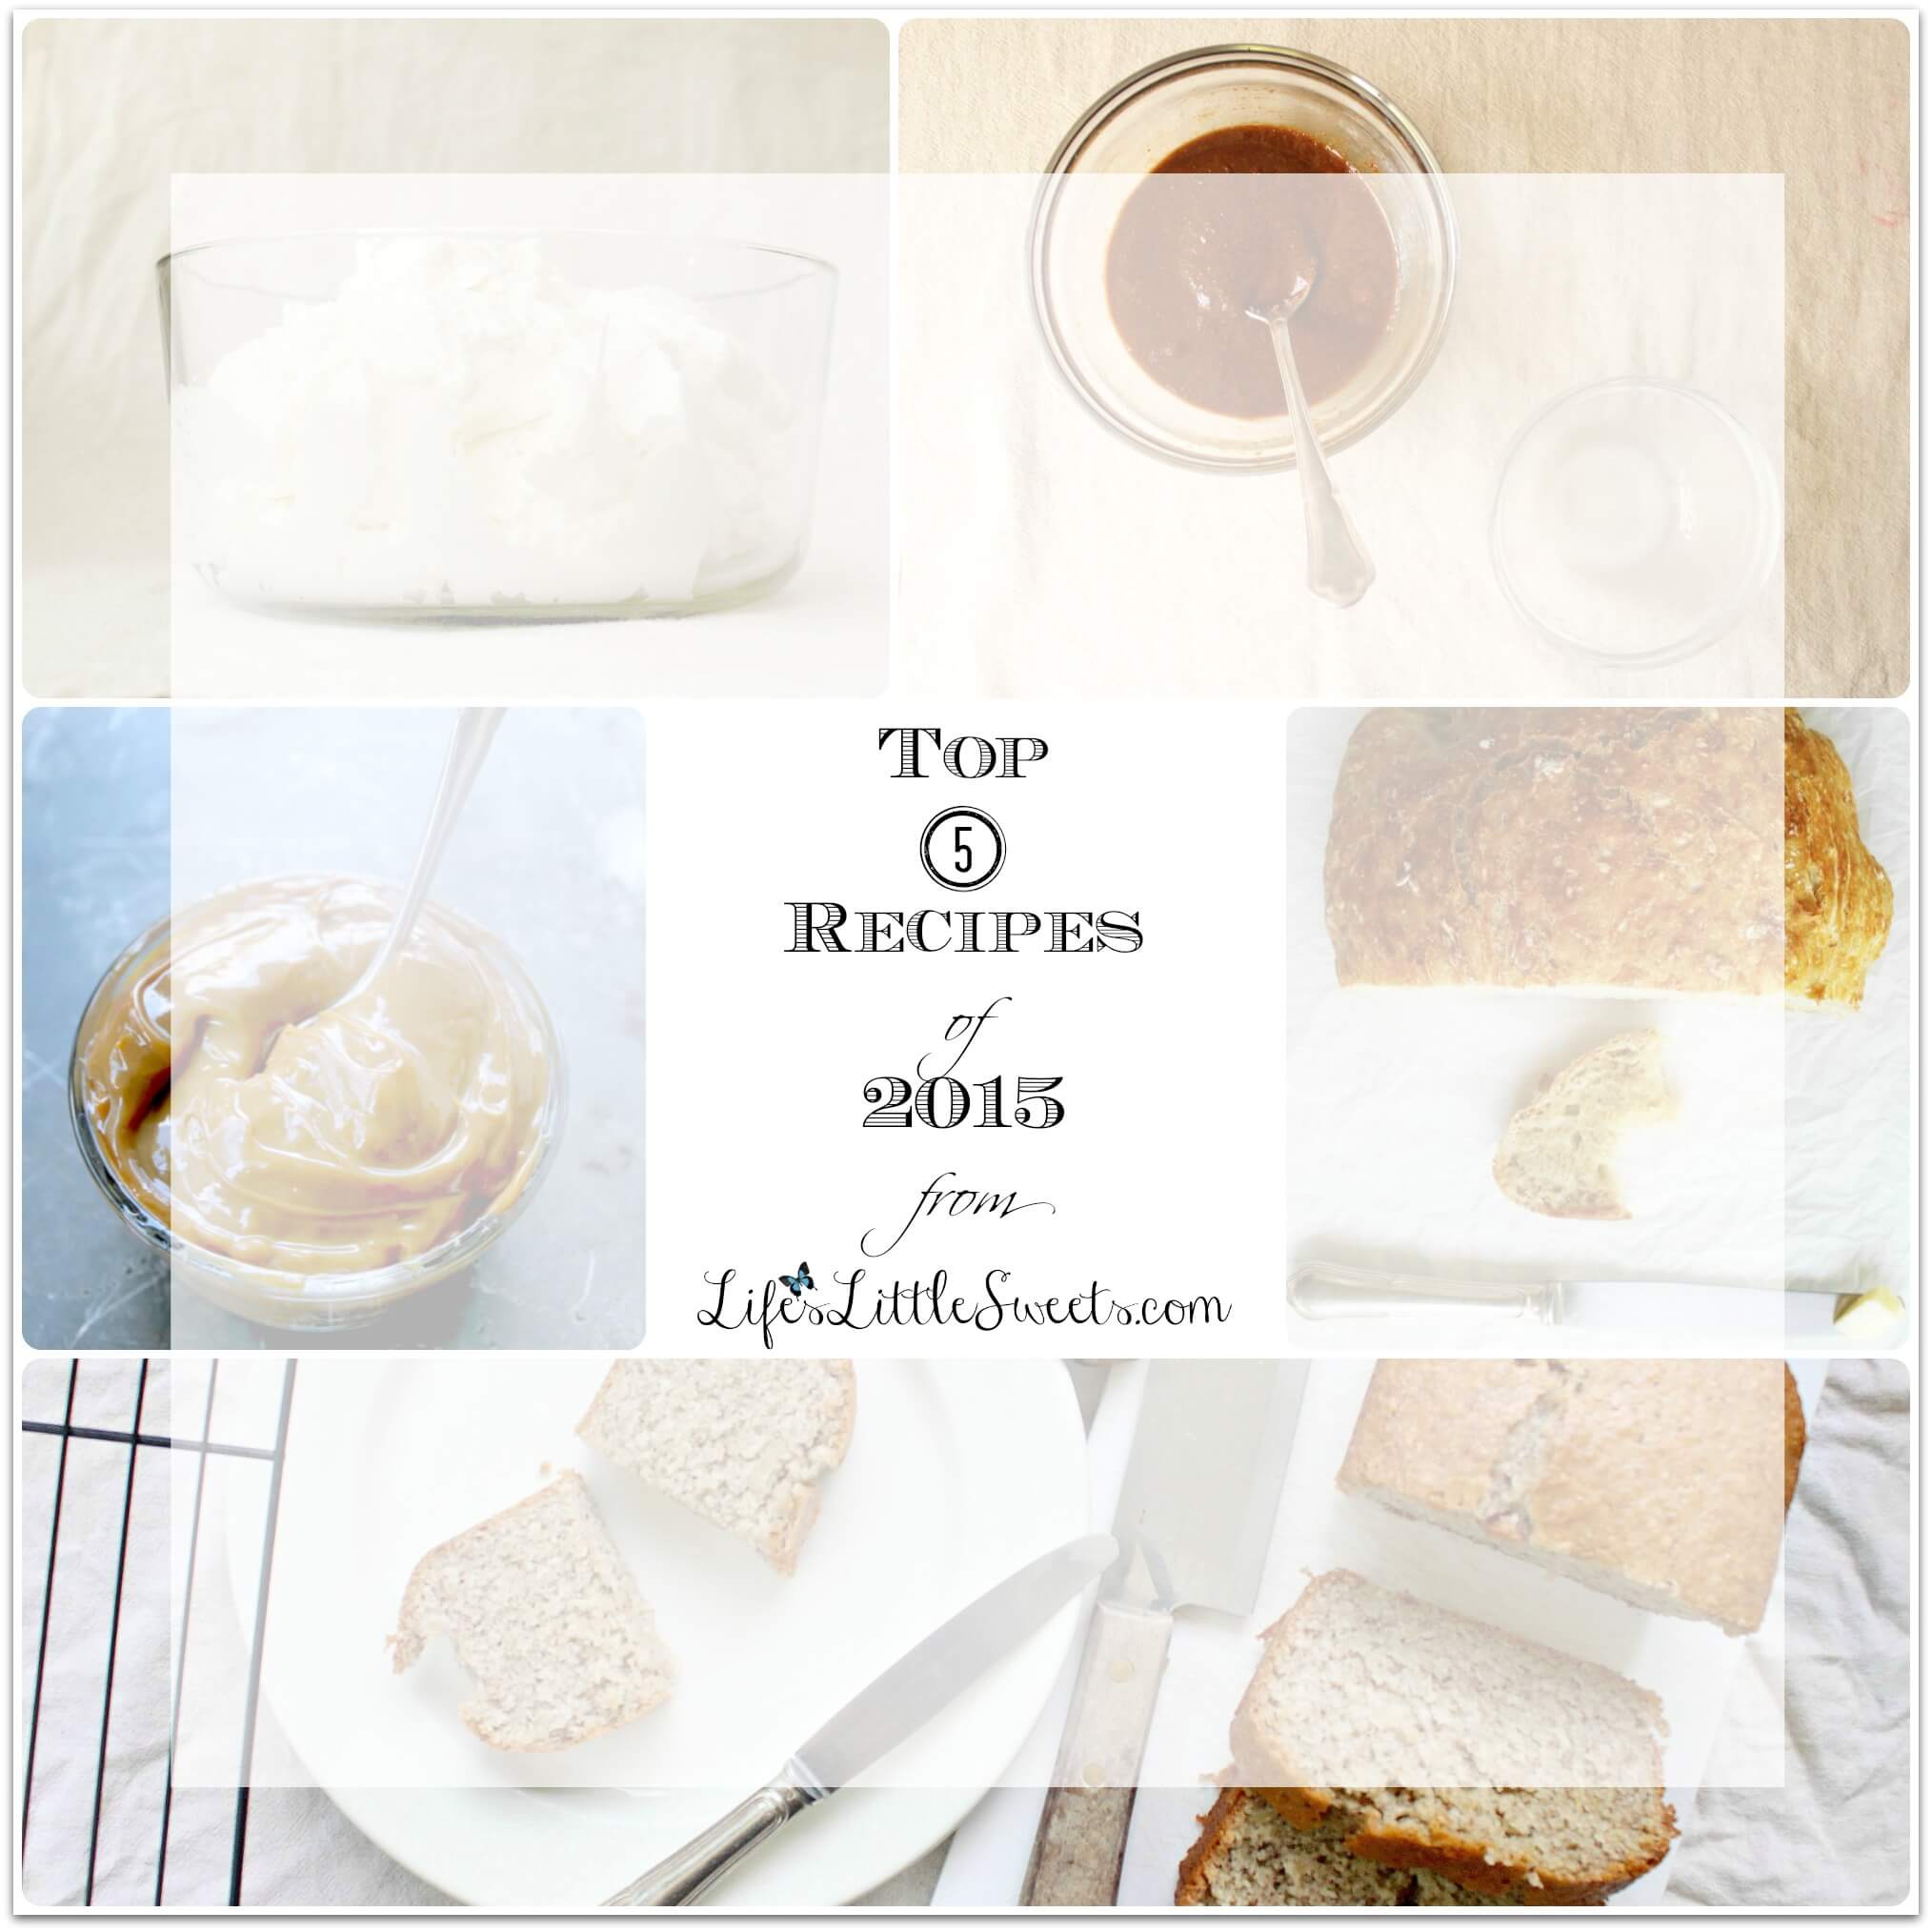 Check out the Top 5 Posts of 2015 on Life’s Little Sweets! #lifeslittlesweets #dessert #sweet #bread #caramel